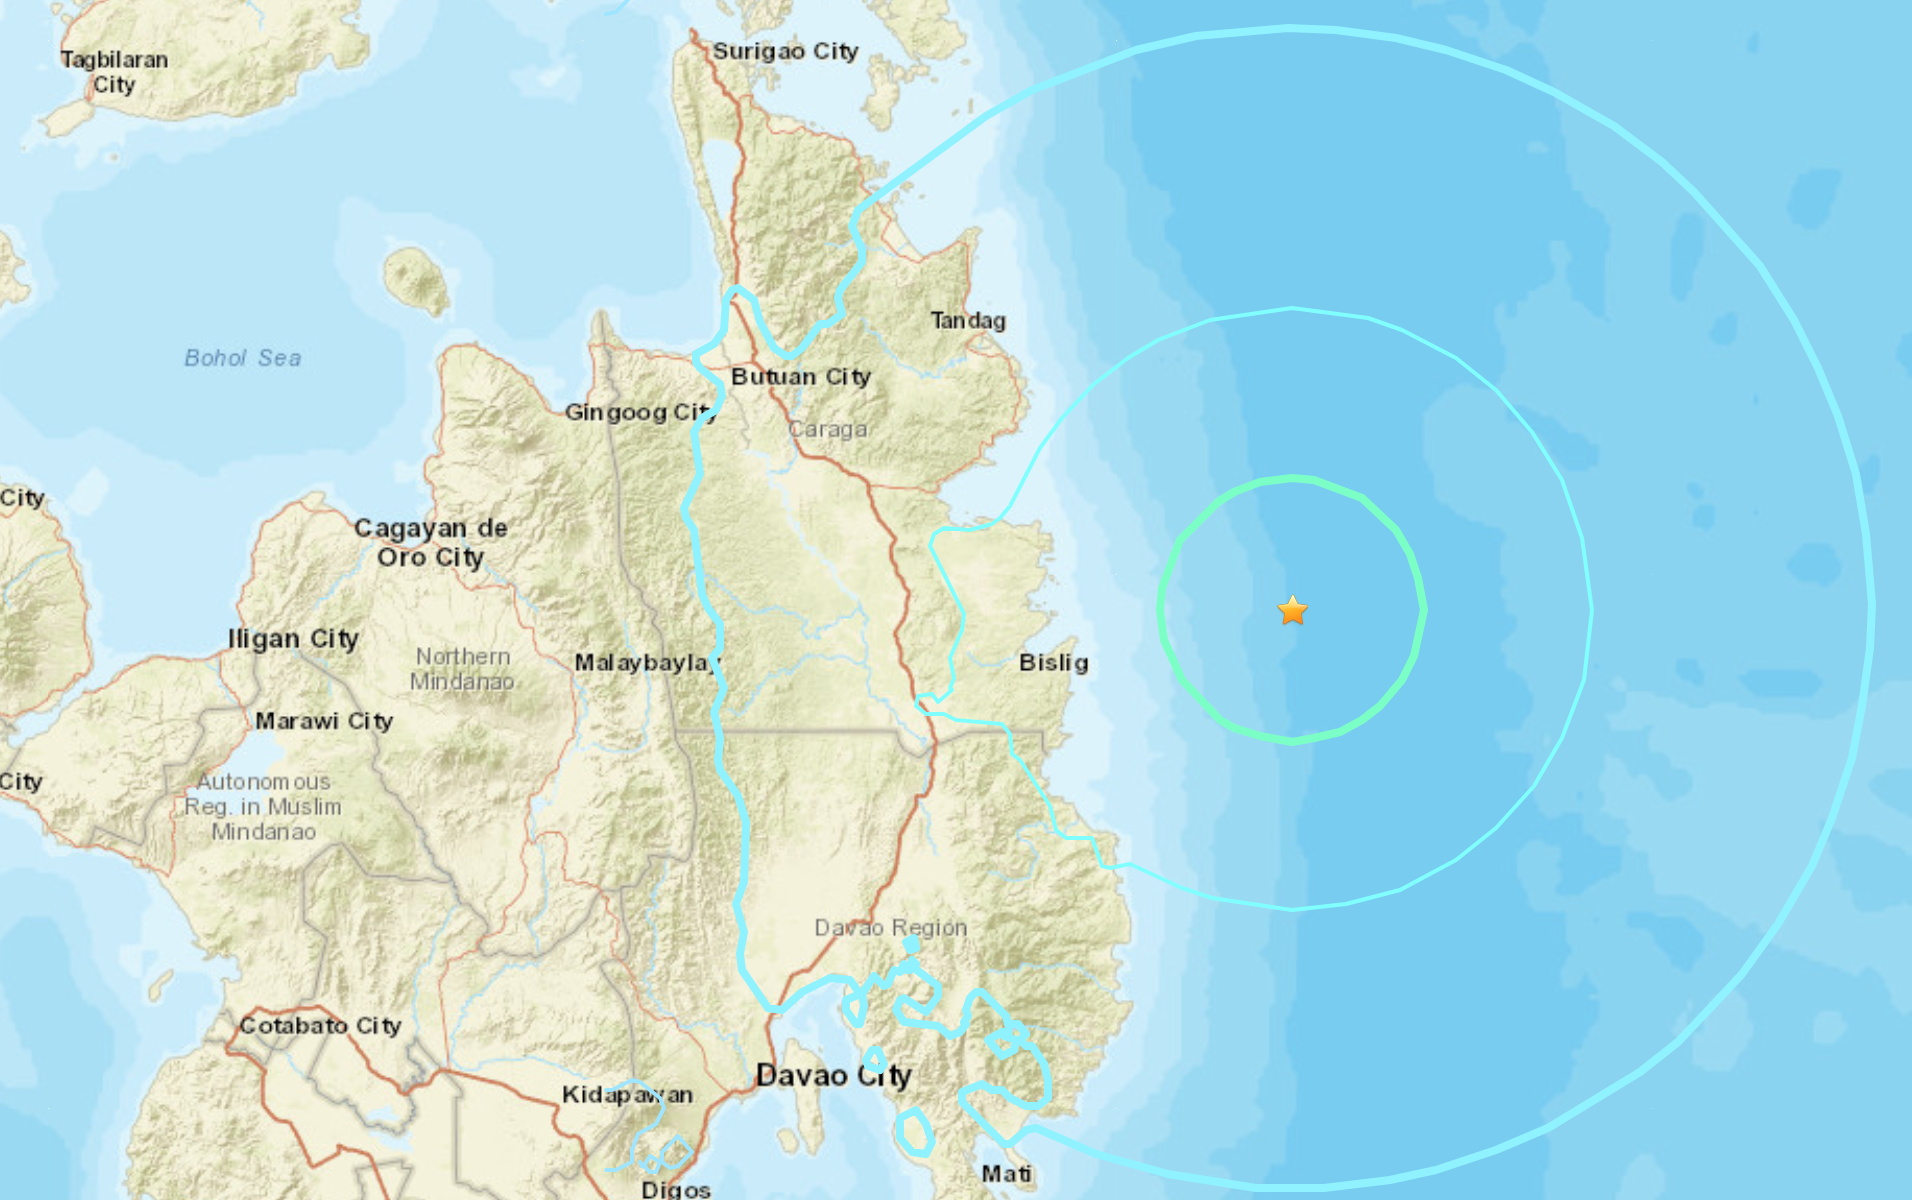 The epicentre of the 7.6 magnitude earthquake, according to the United States Geological Survey